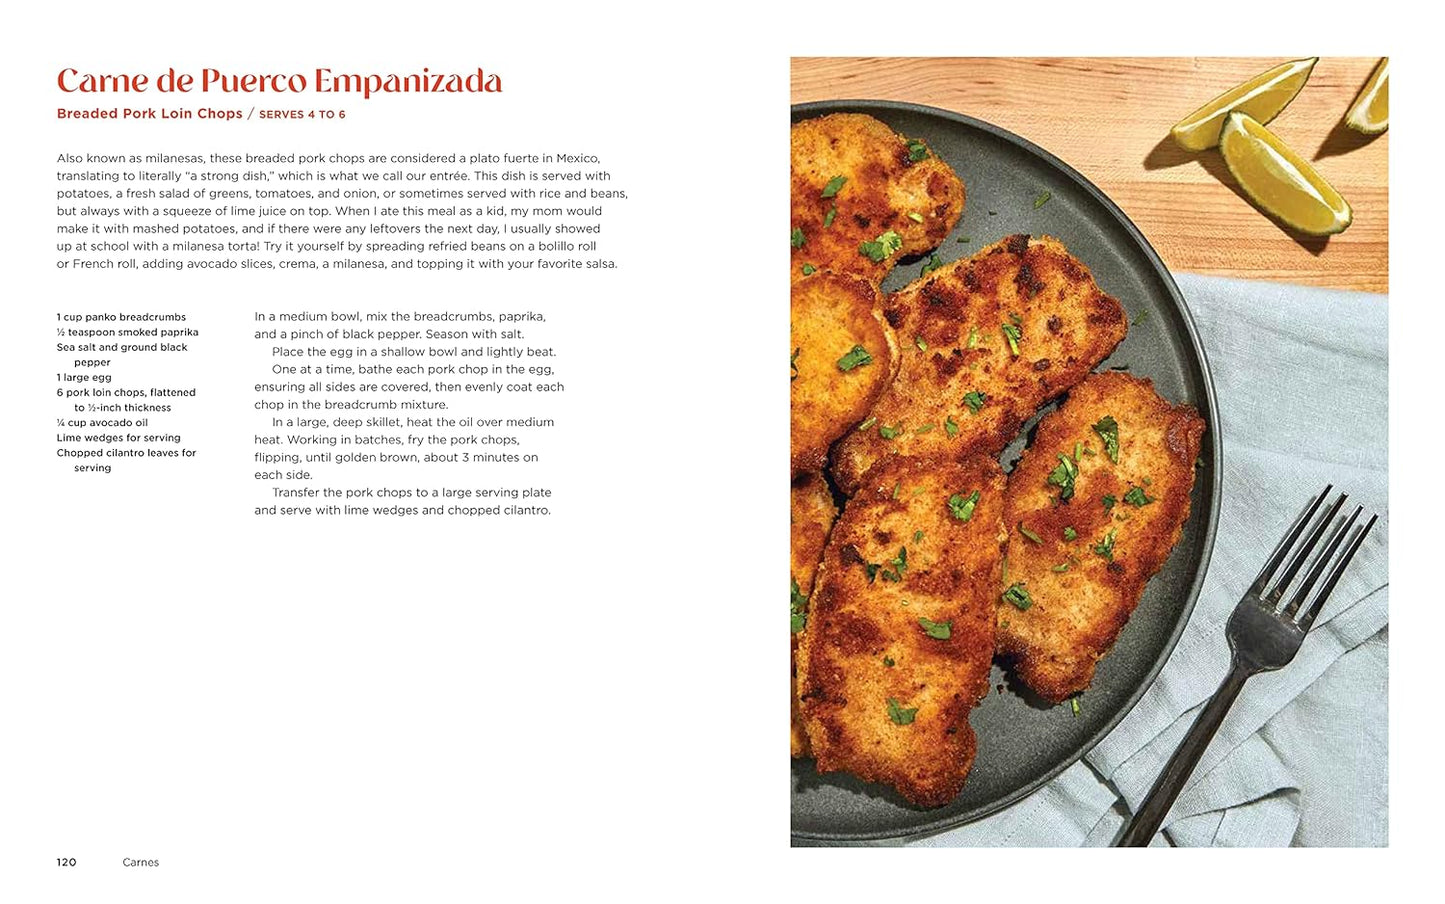 In this inspiring and creative Mexican cookbook, Andrea Pons takes you on a journey through flavor, family, and her immigration story. With 78 easy and delicious recipes from three generations of women in her family, this cookbook offers you a taste of authentic Mexican cuisine.